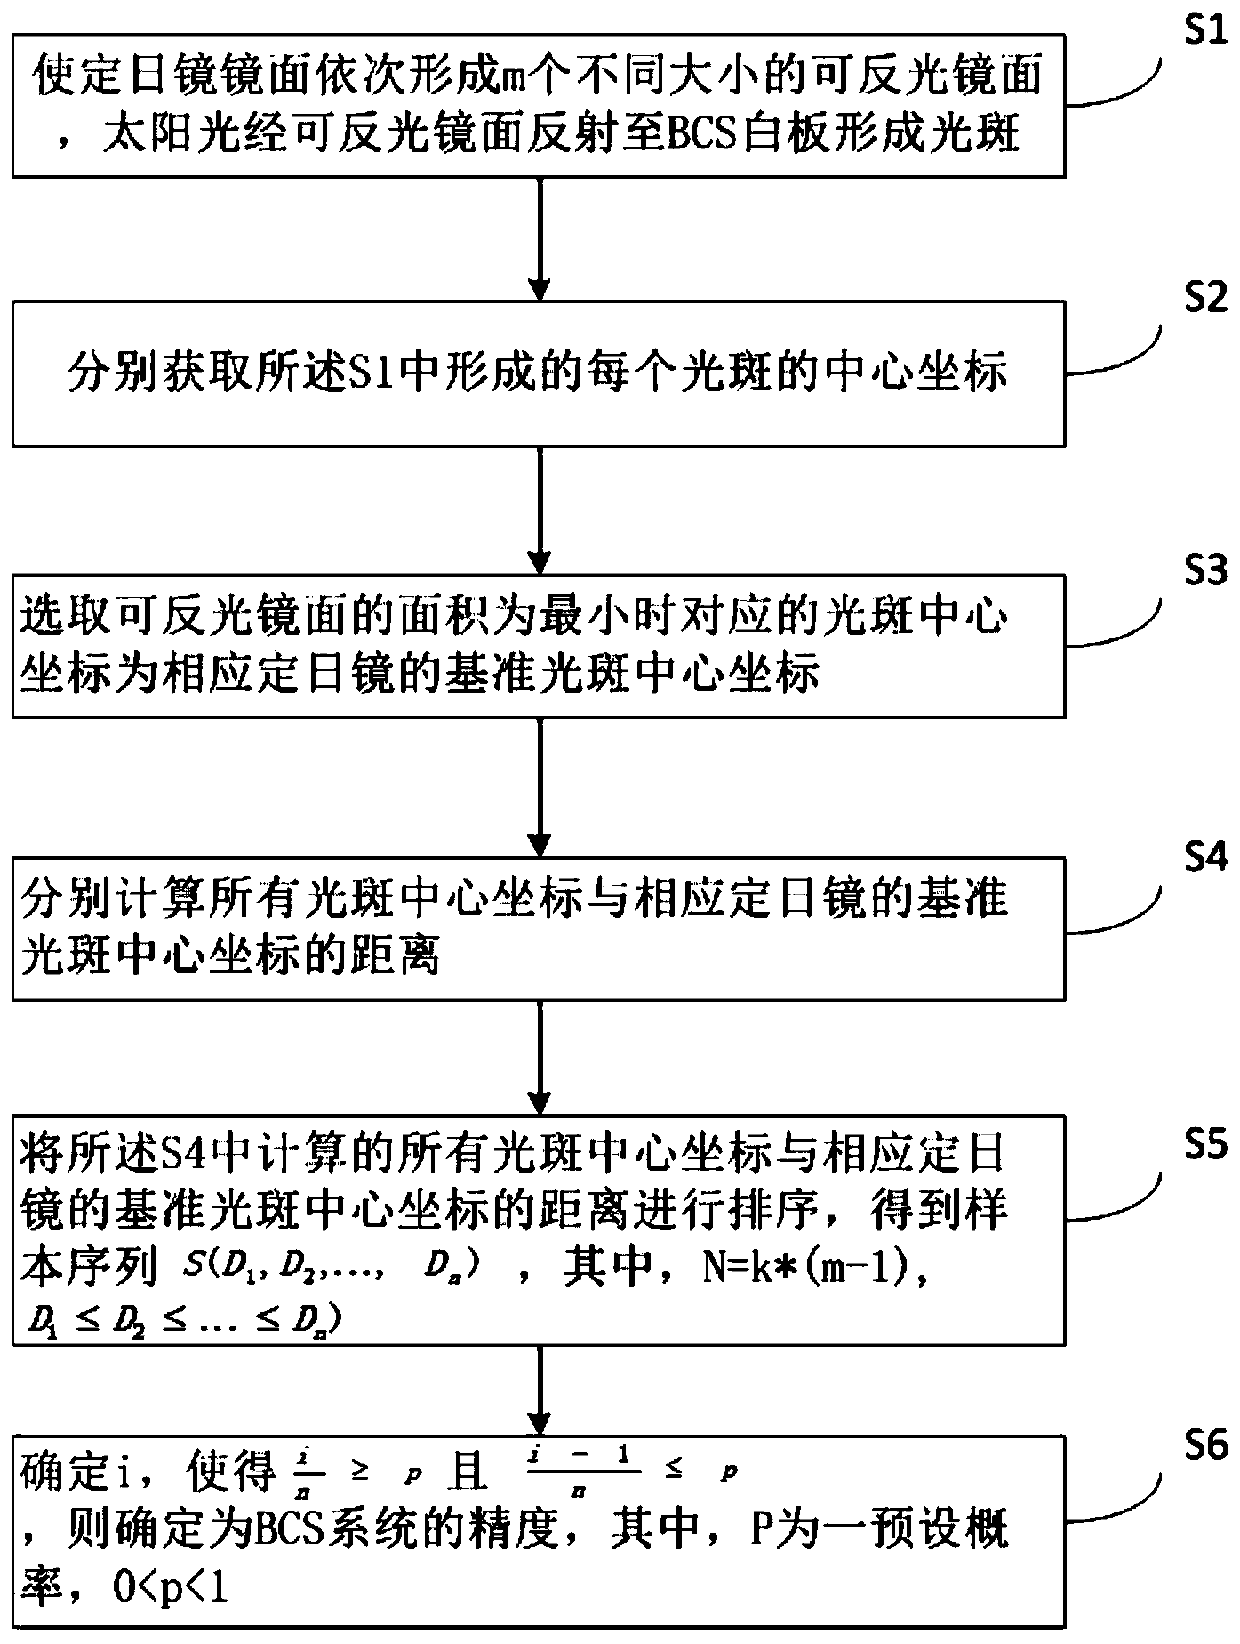 A BCS system accuracy detection method and device